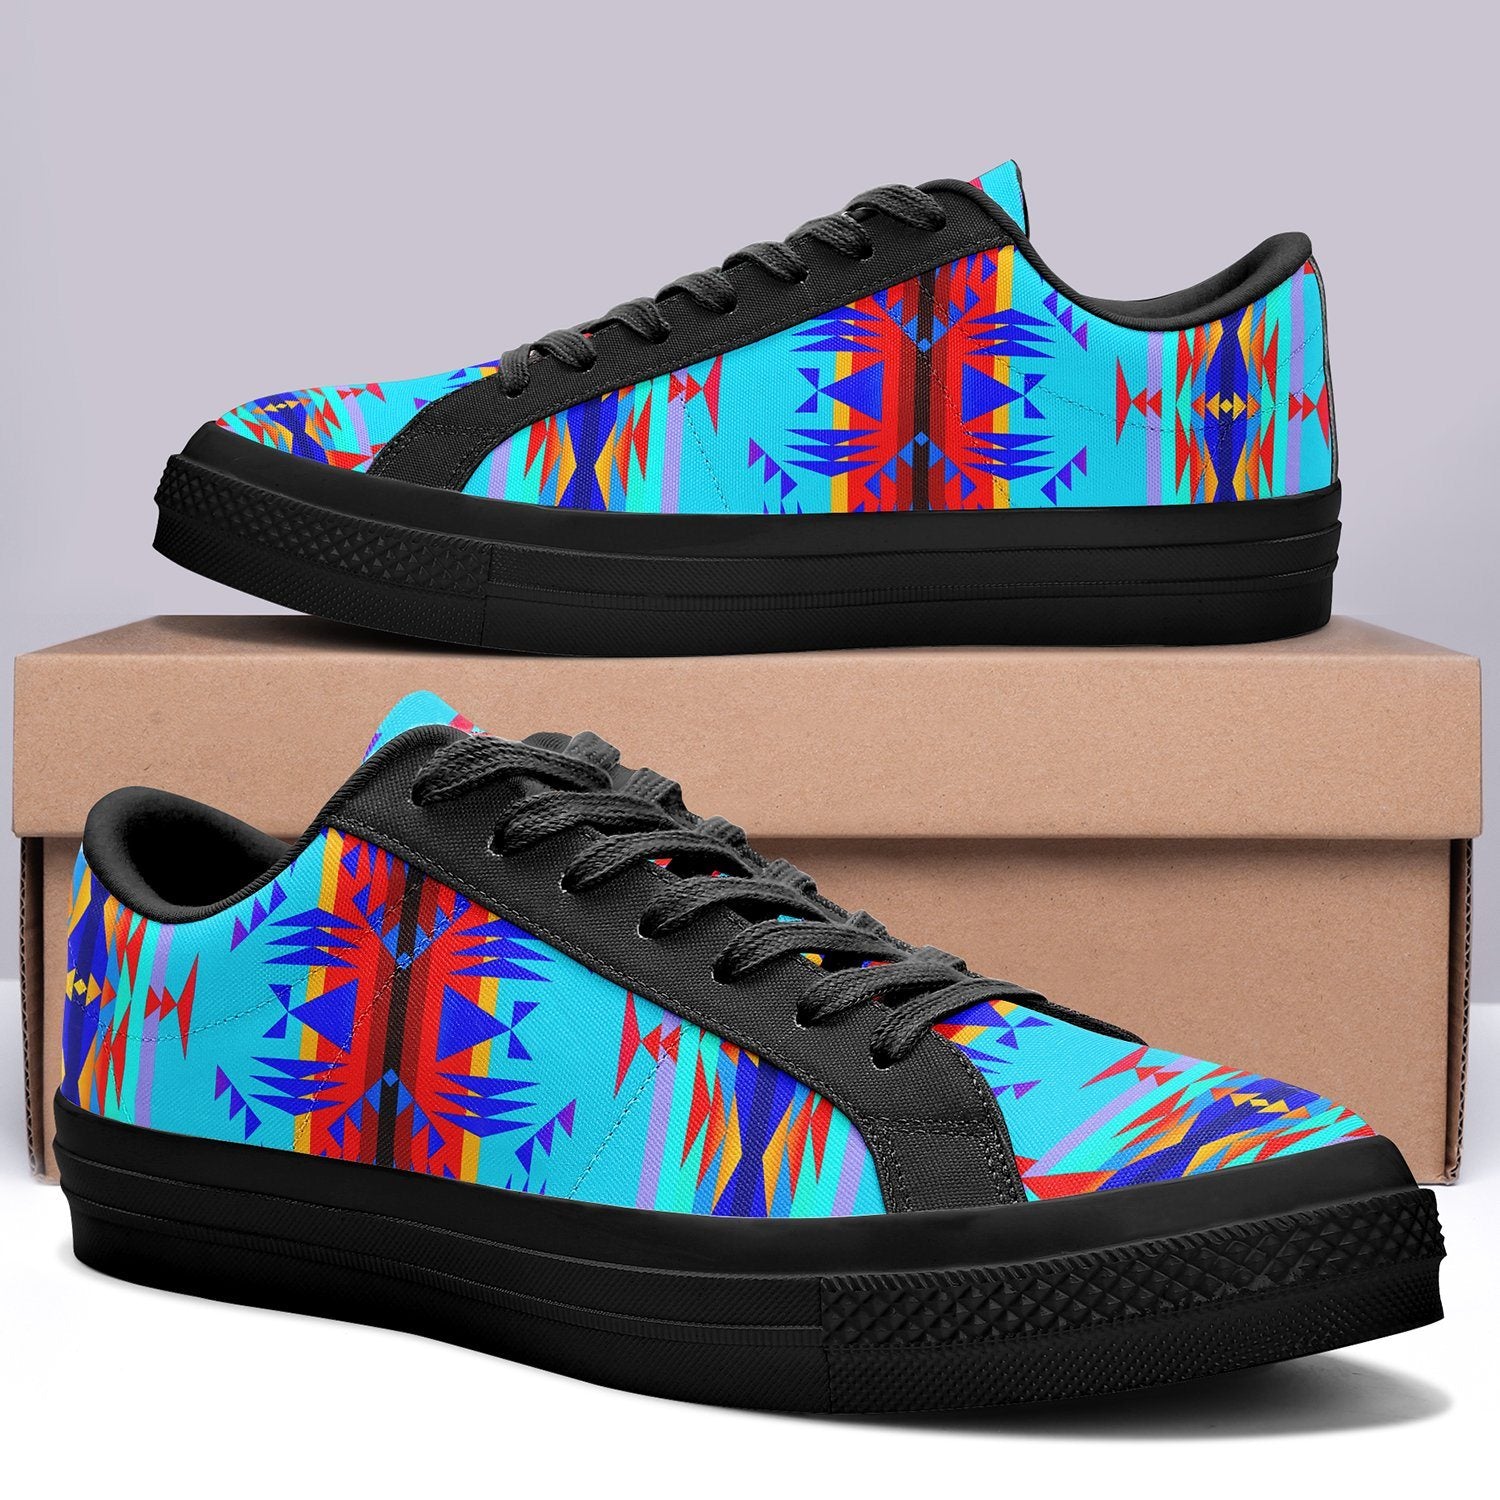 Between the Mountains Blue Aapisi Low Top Canvas Shoes Black Sole 49 Dzine 